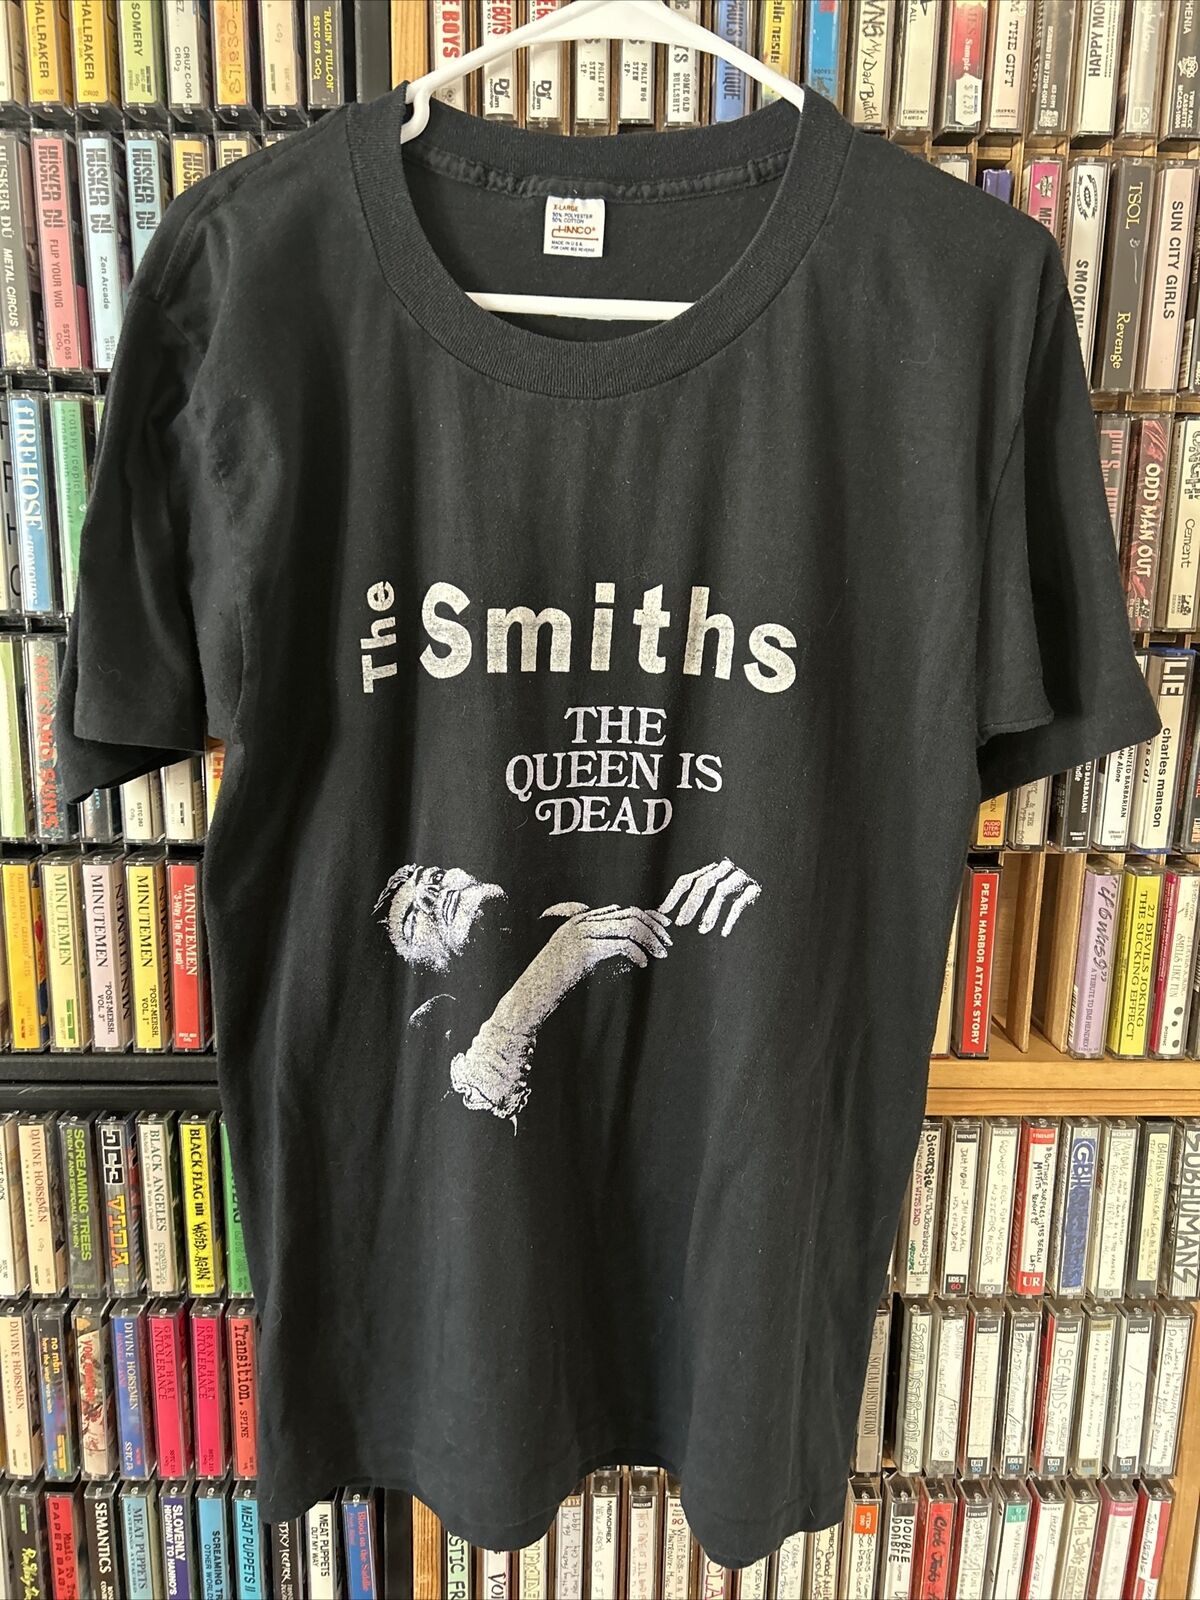 The Smiths The Queen Is Dead T Shirt  XL Large Vintage 80s